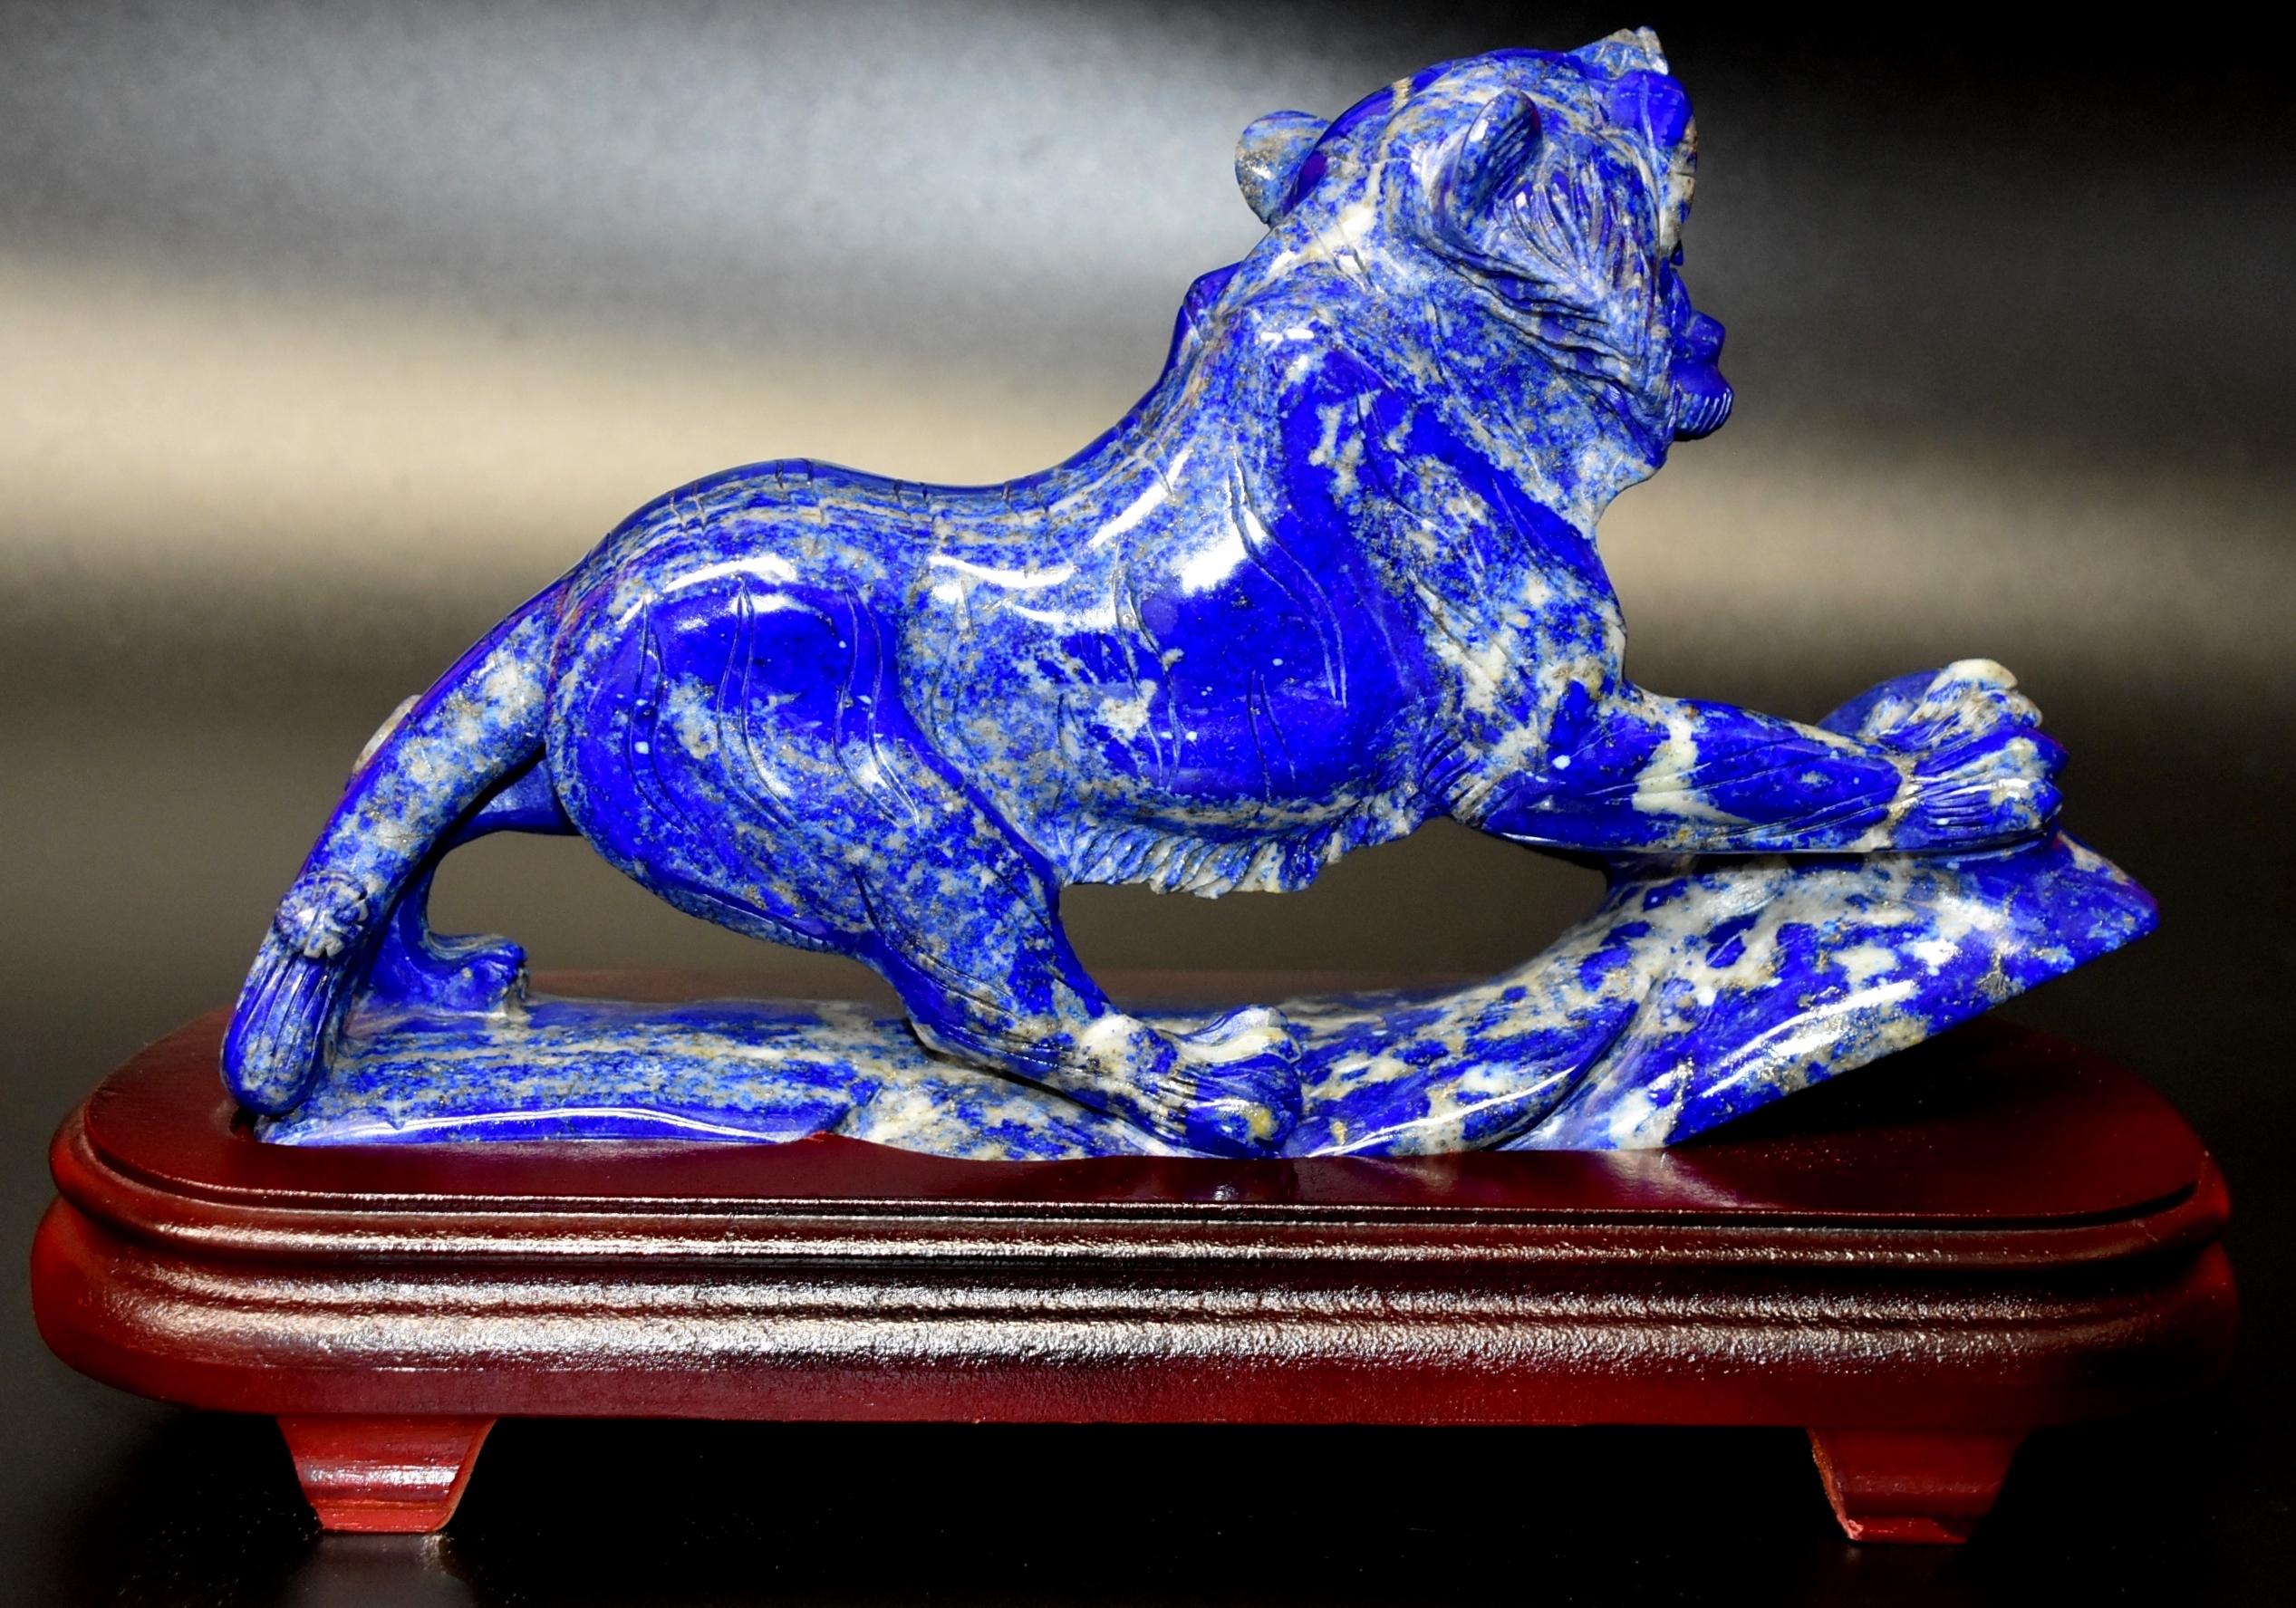 A larger, beautiful all natural lapis lazuli tiger sculpture. The 3 lb stone's is stunning in bright cobalt blue with beautiful spots of white and glittering gold. The beauty of this precious stone is enhanced by the fantastic carving work. The